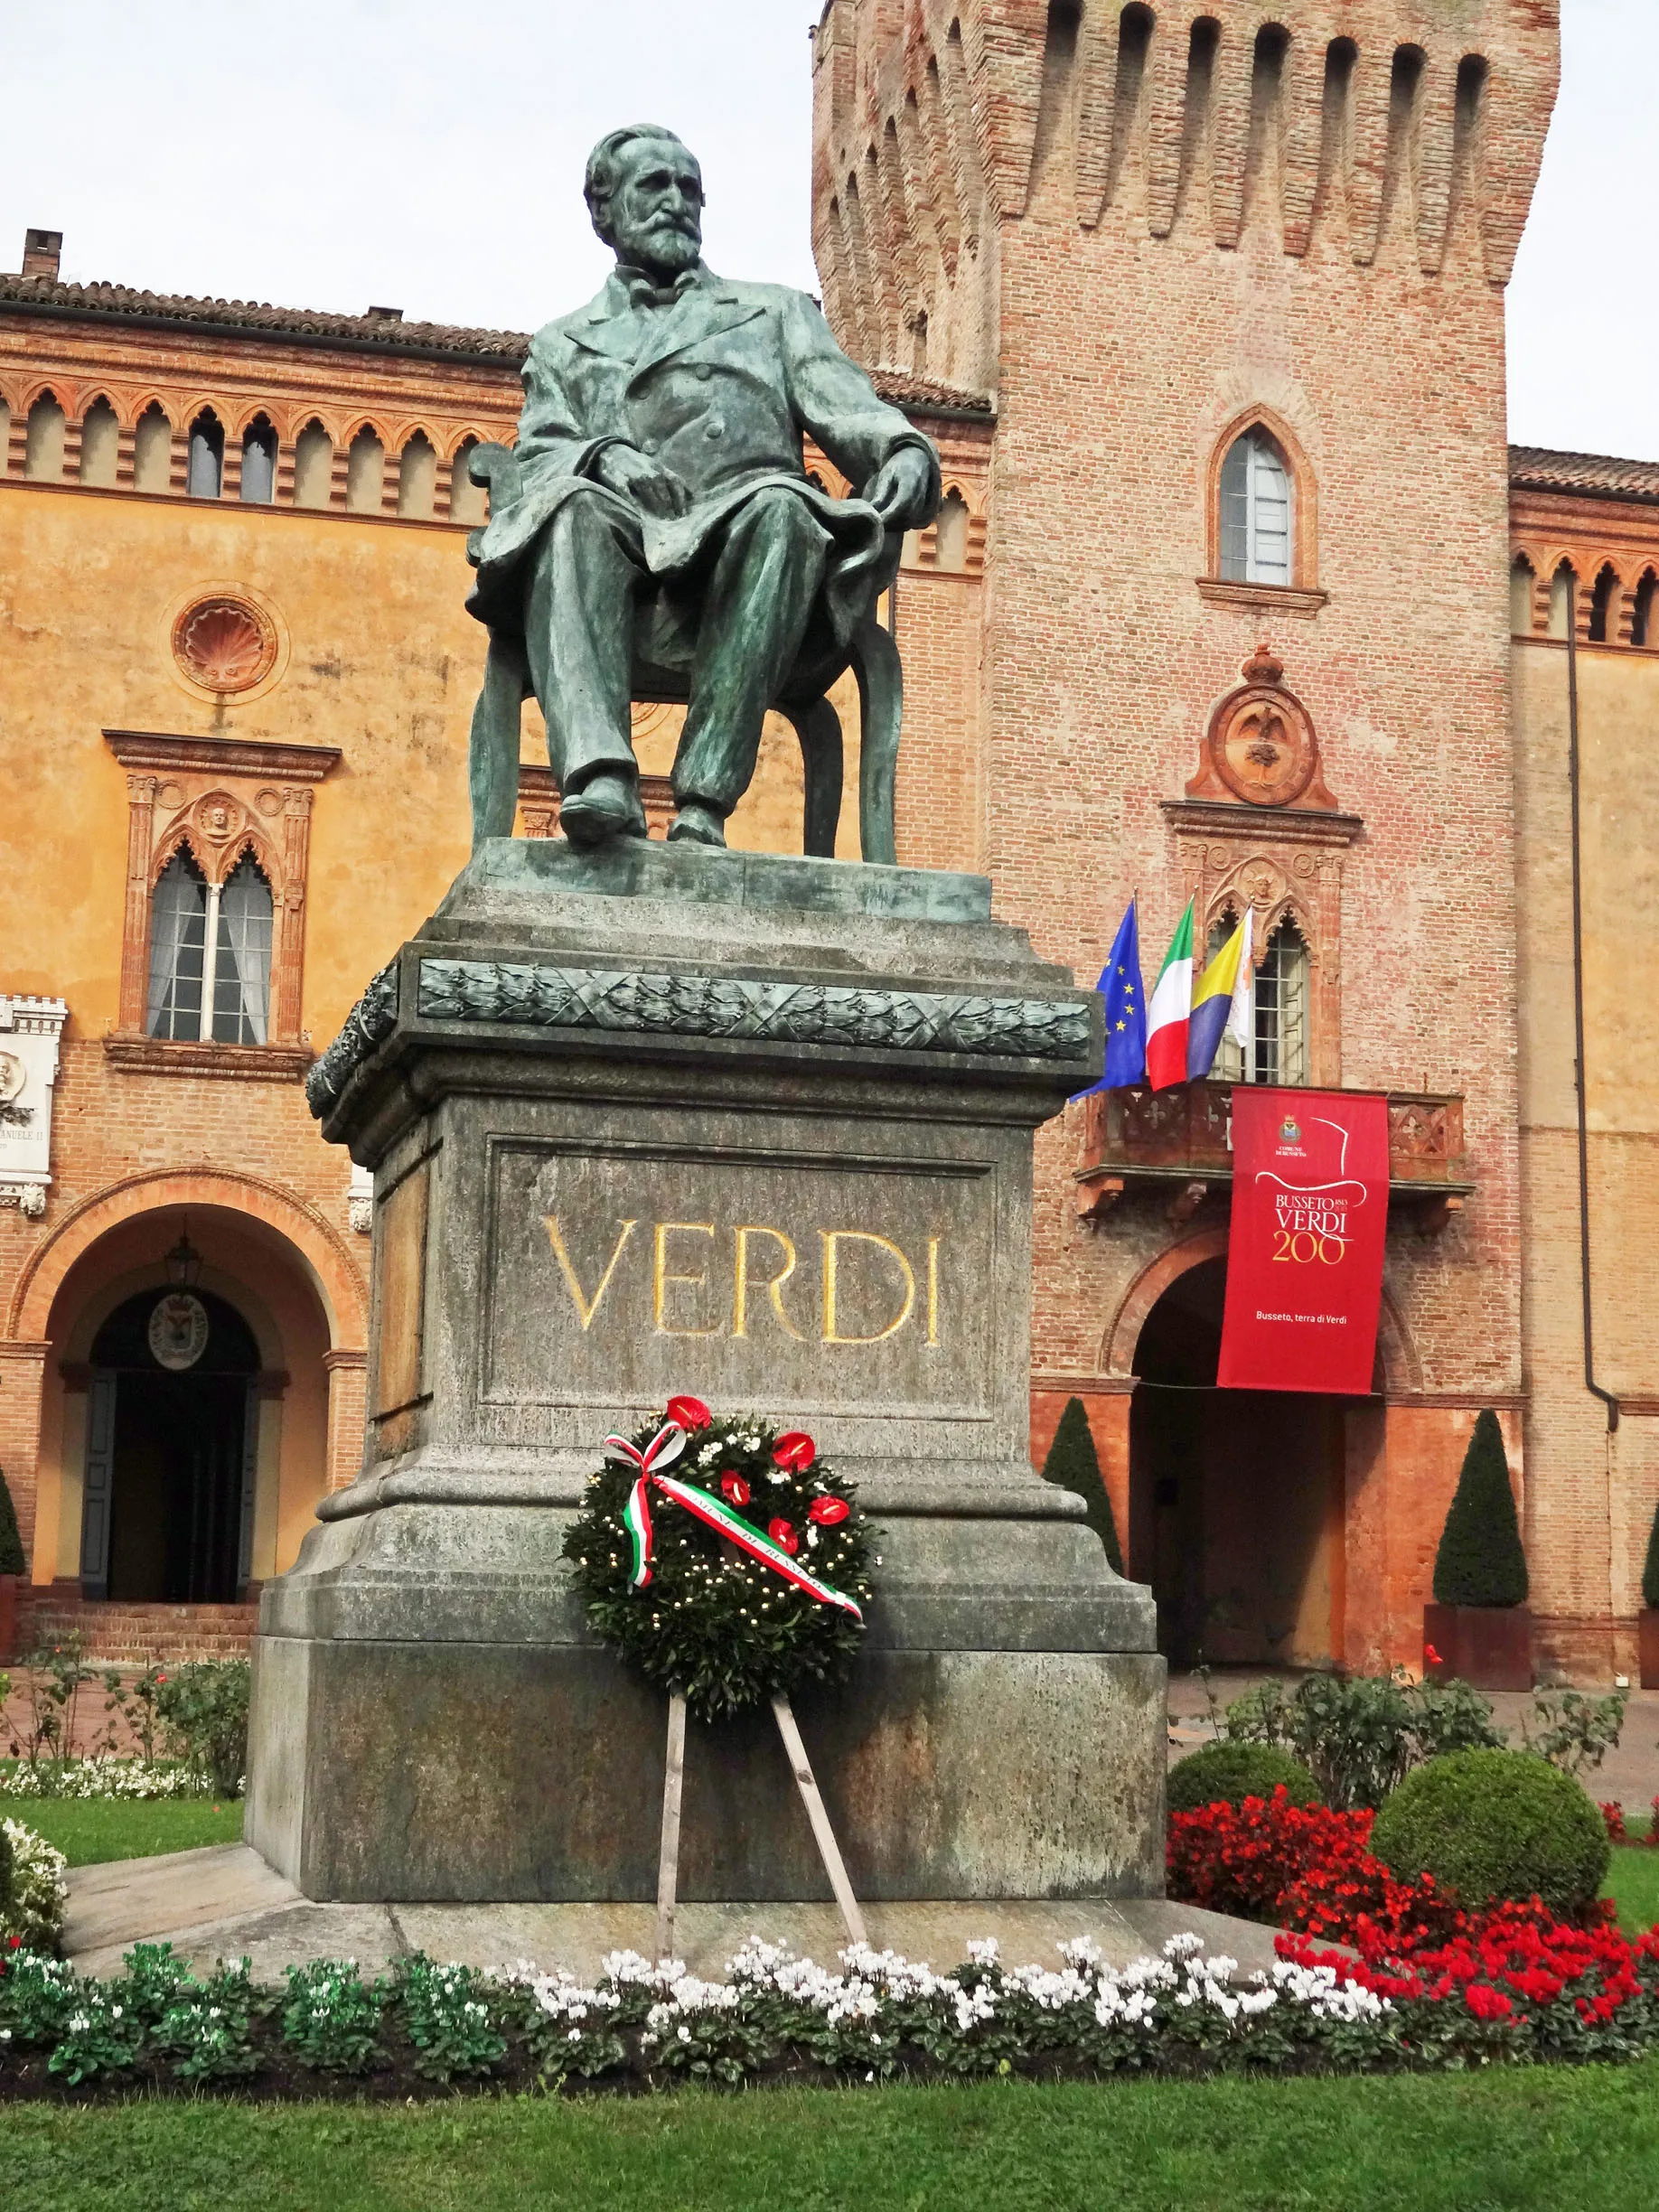 Photo showing: Taken on 10 October 2013, the bicentenary of Giuseppe Verdi's birth in nearby Le Roncole.